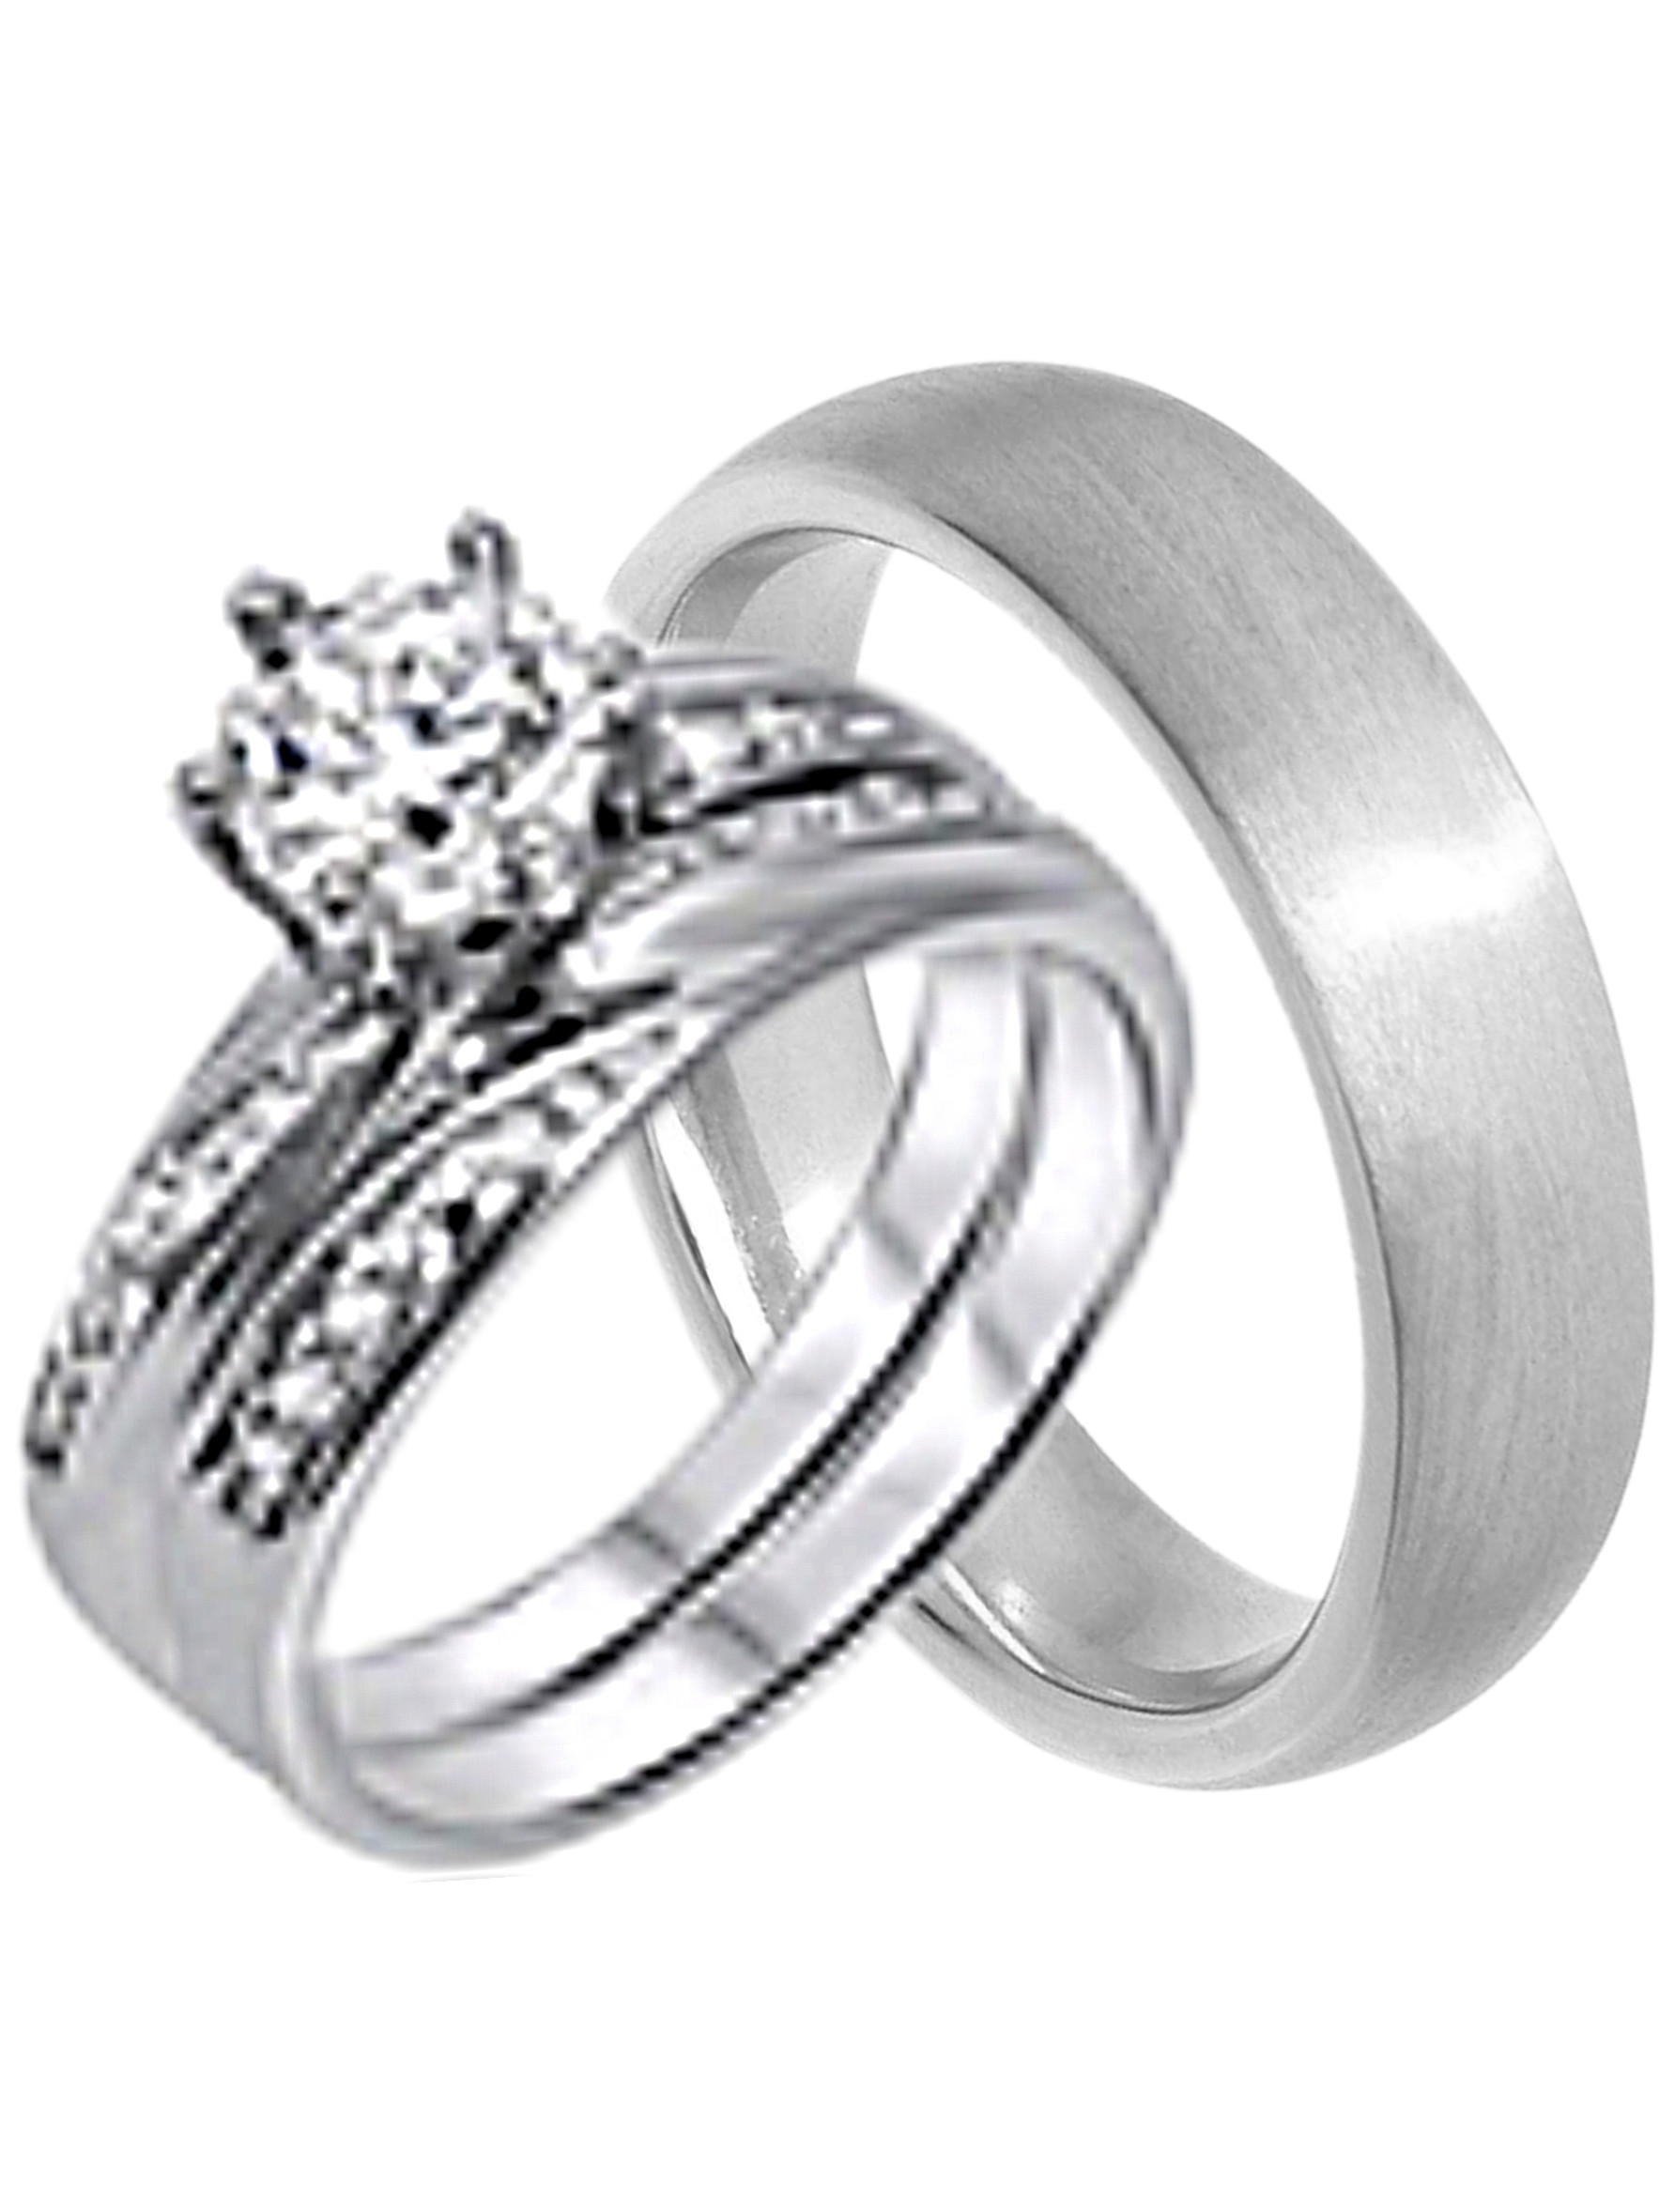 Wedding Rings Sets His And Hers For Cheap
 His and Hers Wedding Ring Set Cheap Wedding Bands for Him